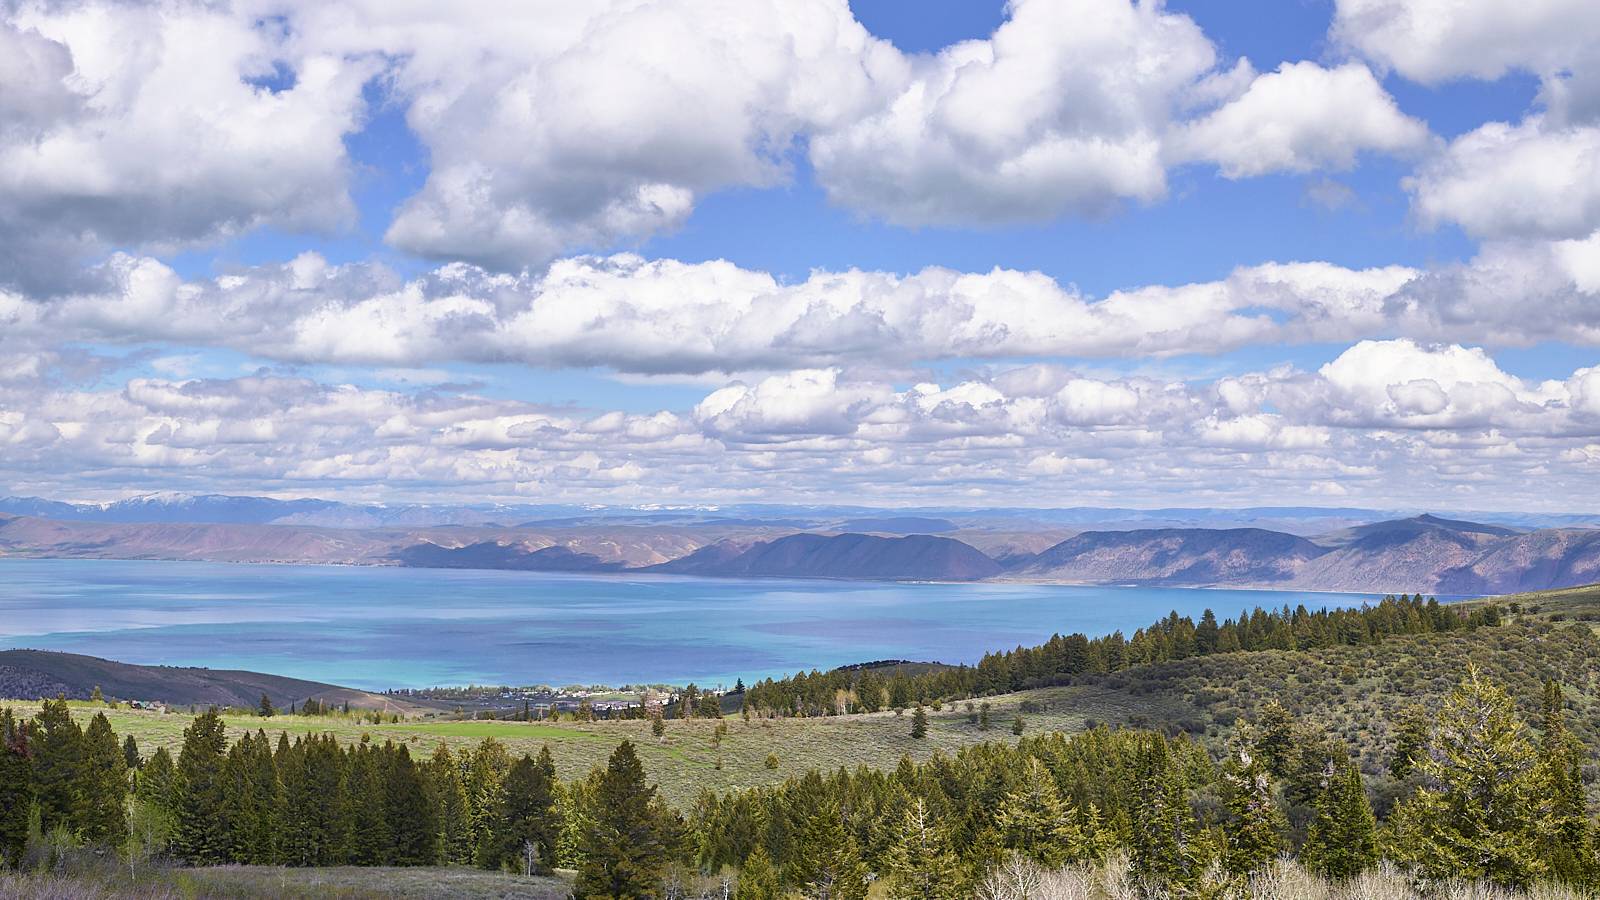 Bear Lake and Garden City as seen from an overlook on U.S. Highway 89 in 2020. (Photo Credit: Andrew McAllister)